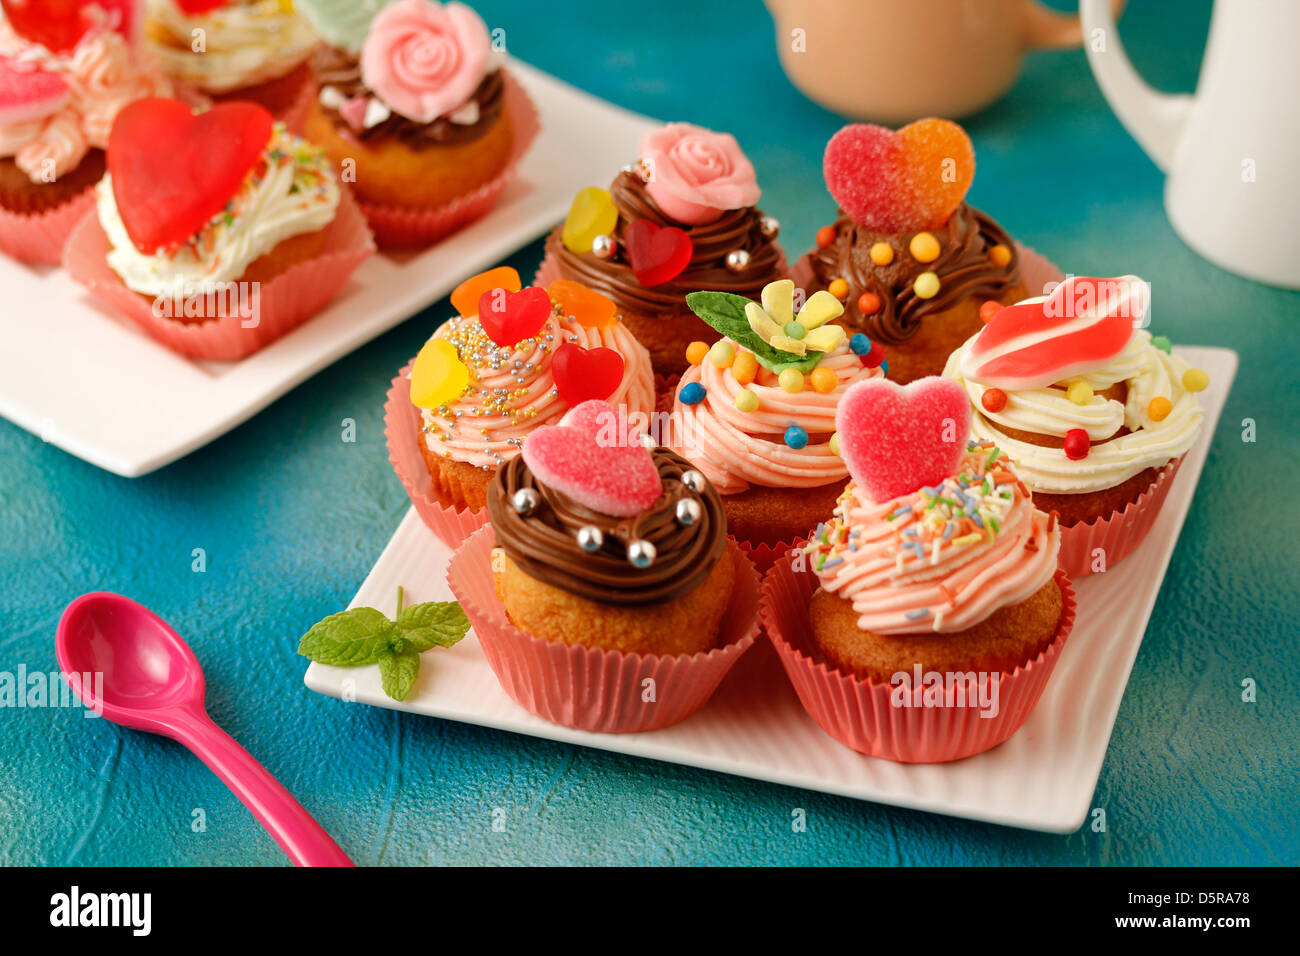 Fall in love cupcakes. Recipe available. Stock Photo